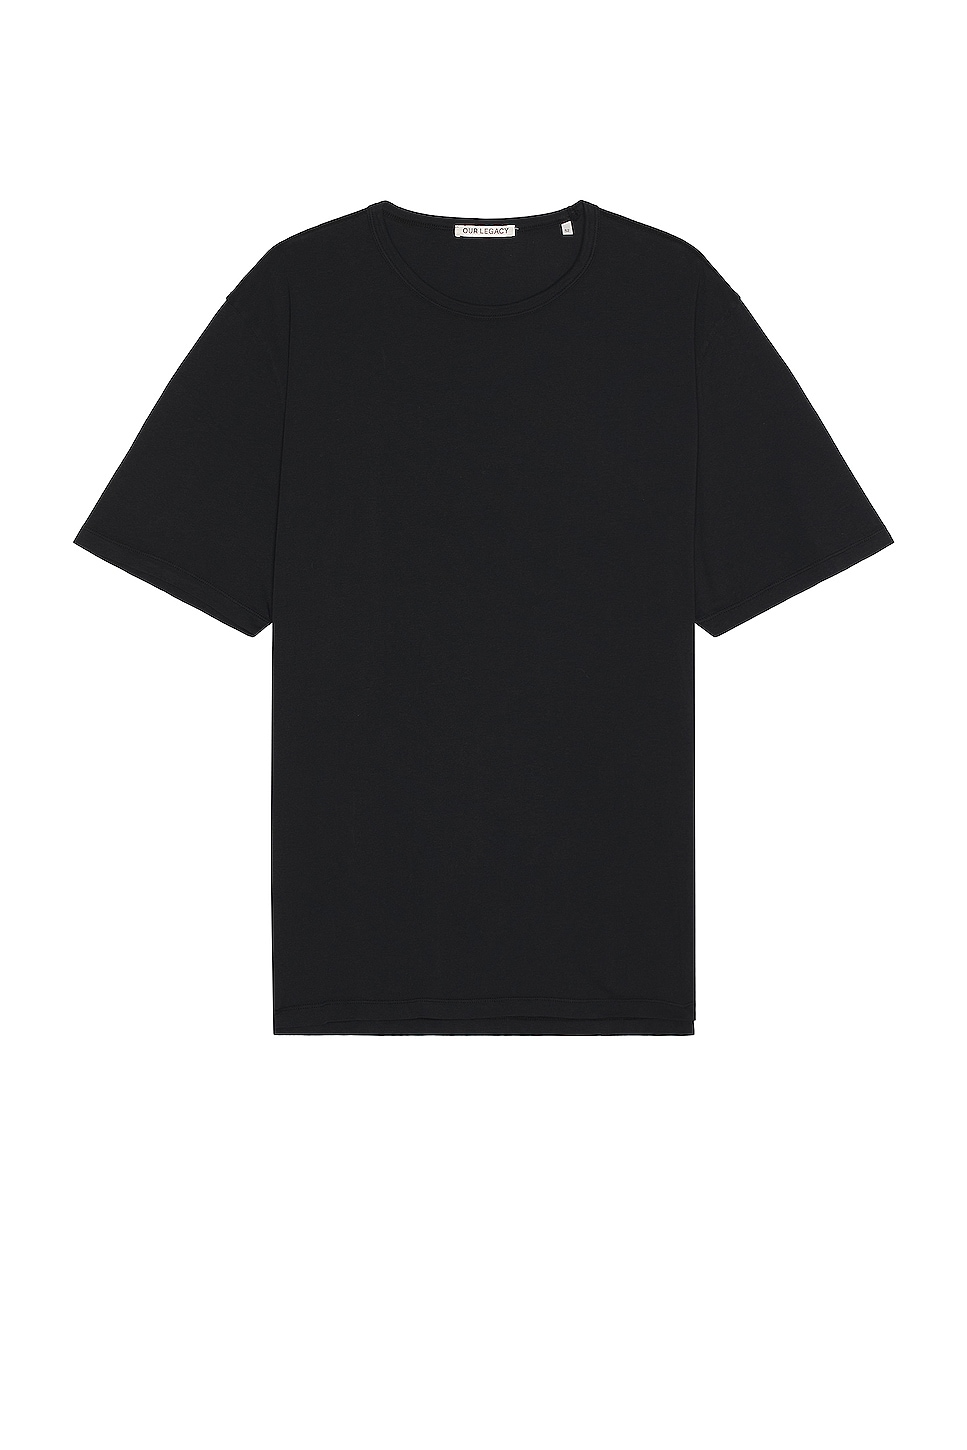 Image 1 of Our Legacy New Box T-Shirt in Black Clean Jersey